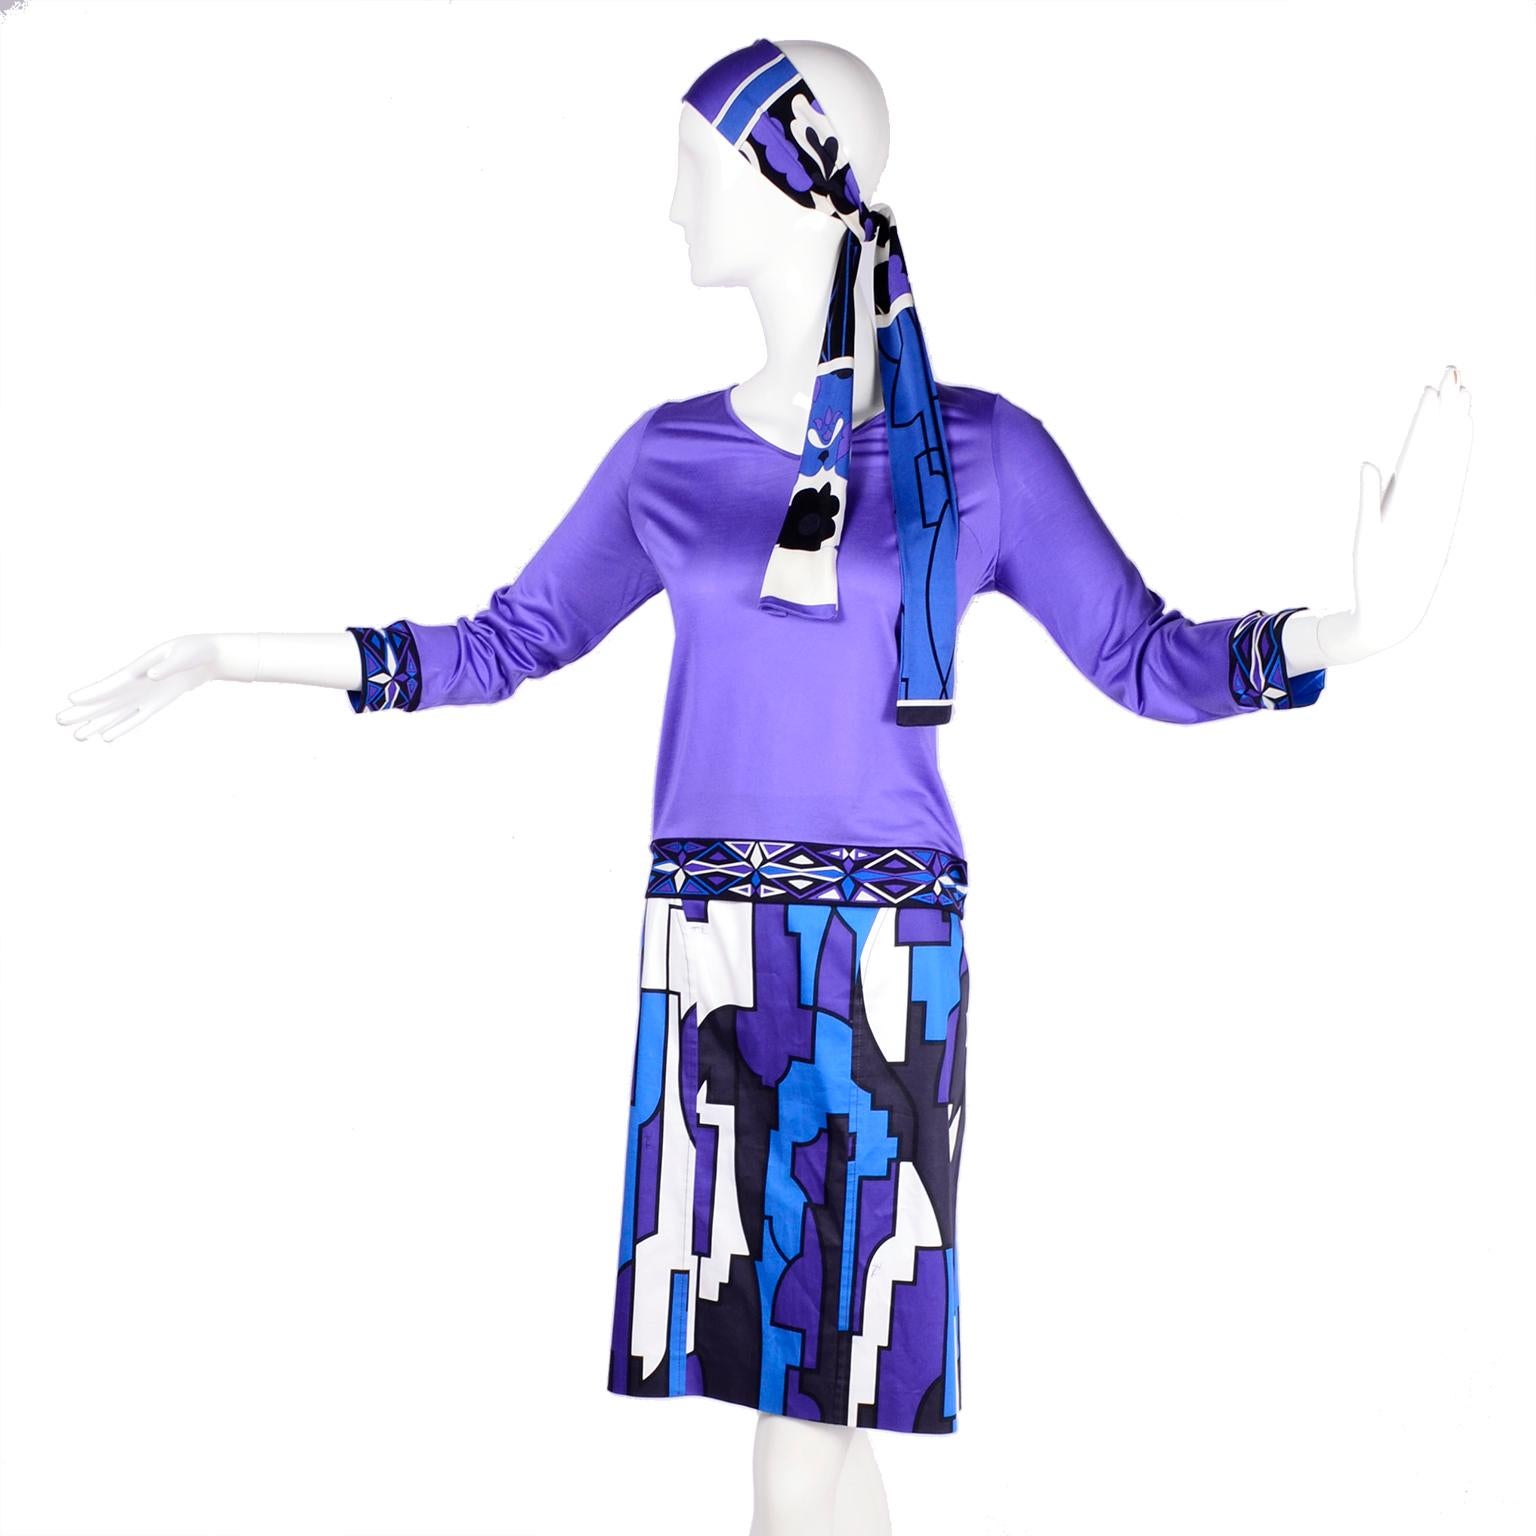 This is a contemporary Emilio Pucci 2 piece outfit with a purple silk jersey top with a patterned hem band and cuffs in purple, blue and white.   The top has a single button at the neck and it comes with a coordinating scarf that can be worn as a